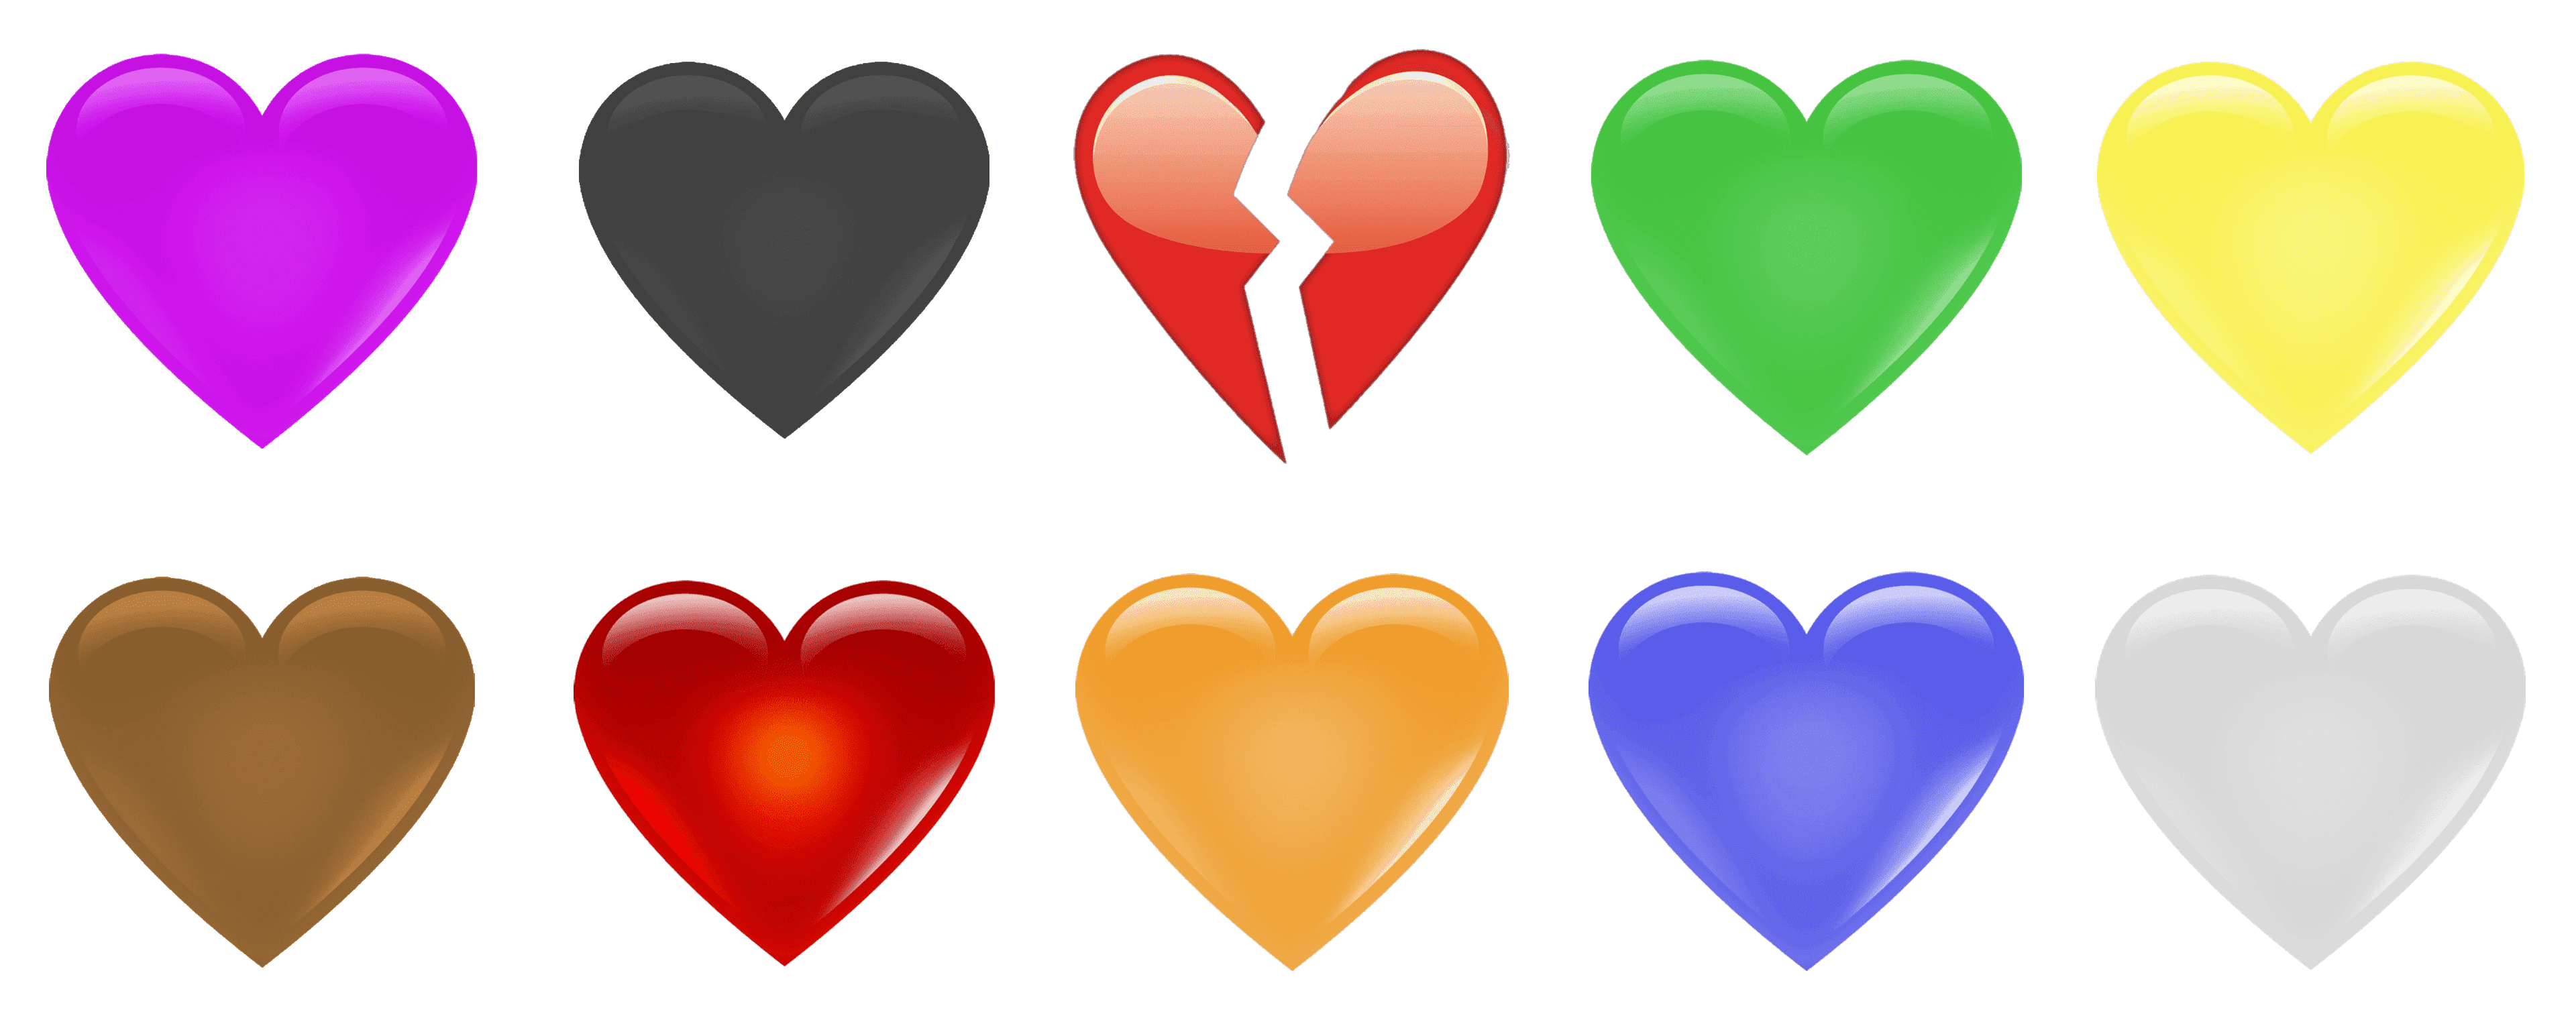 Heart Emoji Meanings: Color Matters. Heart emoticon    meaning